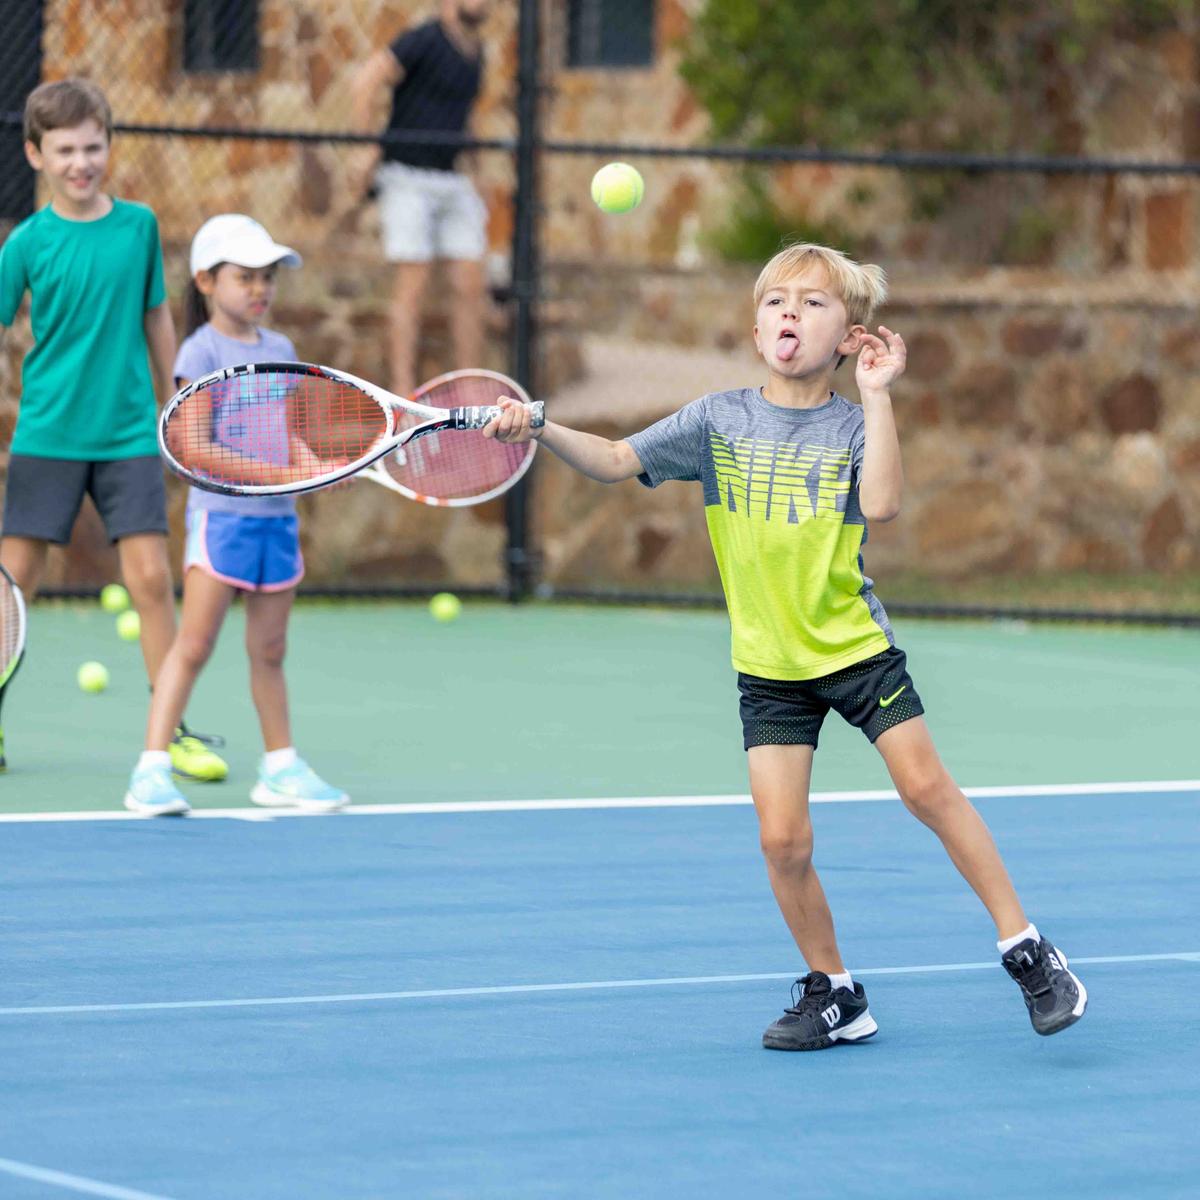 Some camps specialize in developing the next generation of tennis pros. (Courtesy of Austin Tennis Academy)